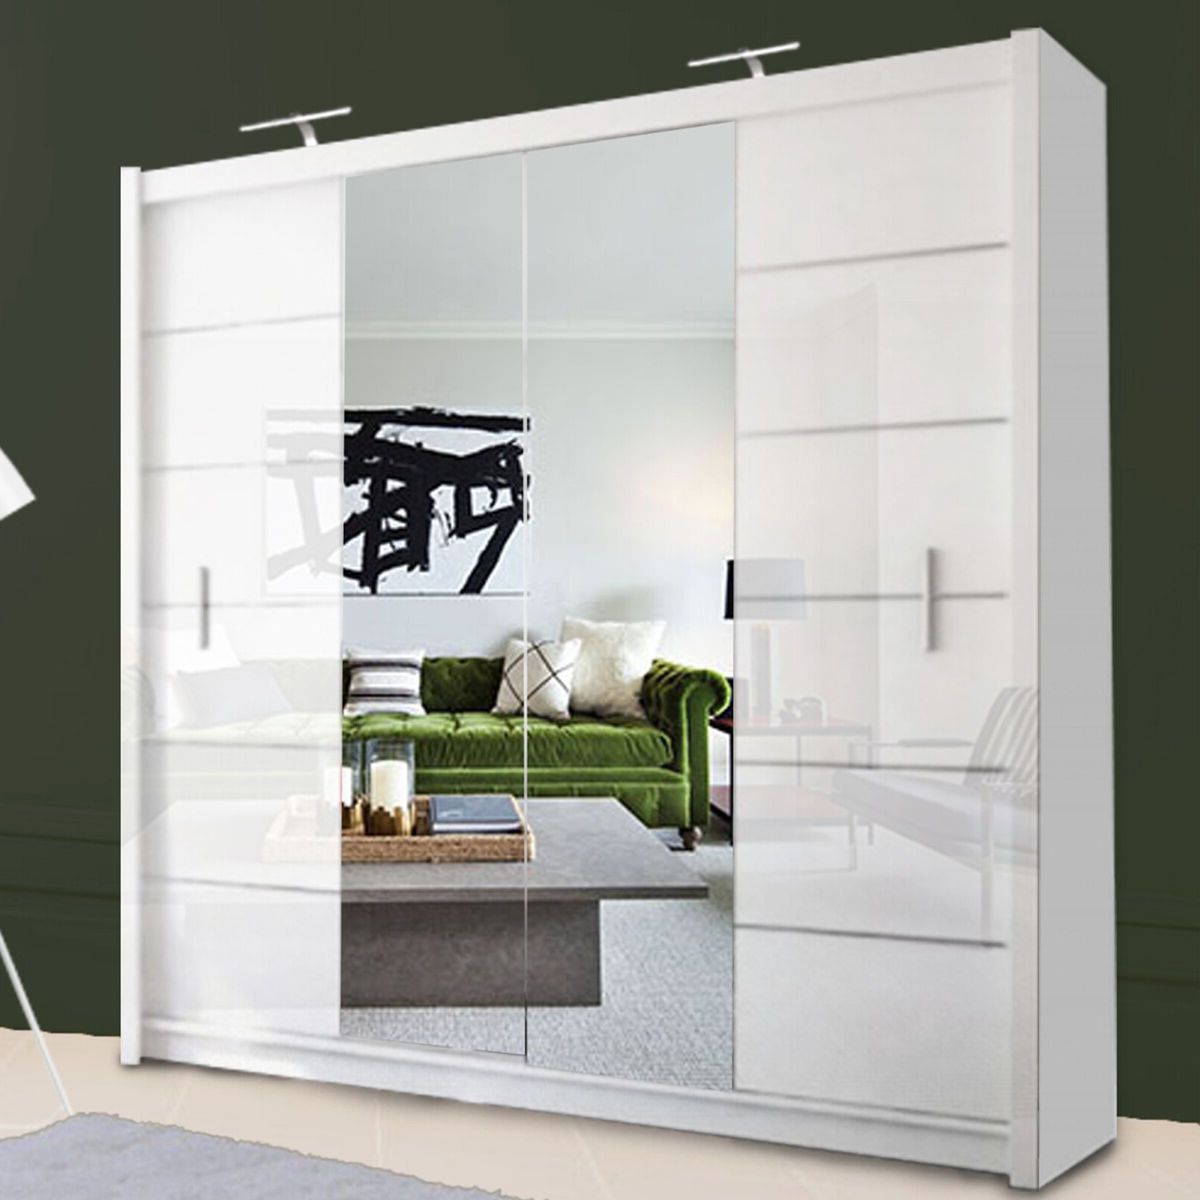 Modern Double Sliding Door Wardrobe Center Mirror Lisbon 2 Colours – 3  Sizes | Ebay Intended For Double Wardrobes With Mirror (View 16 of 20)